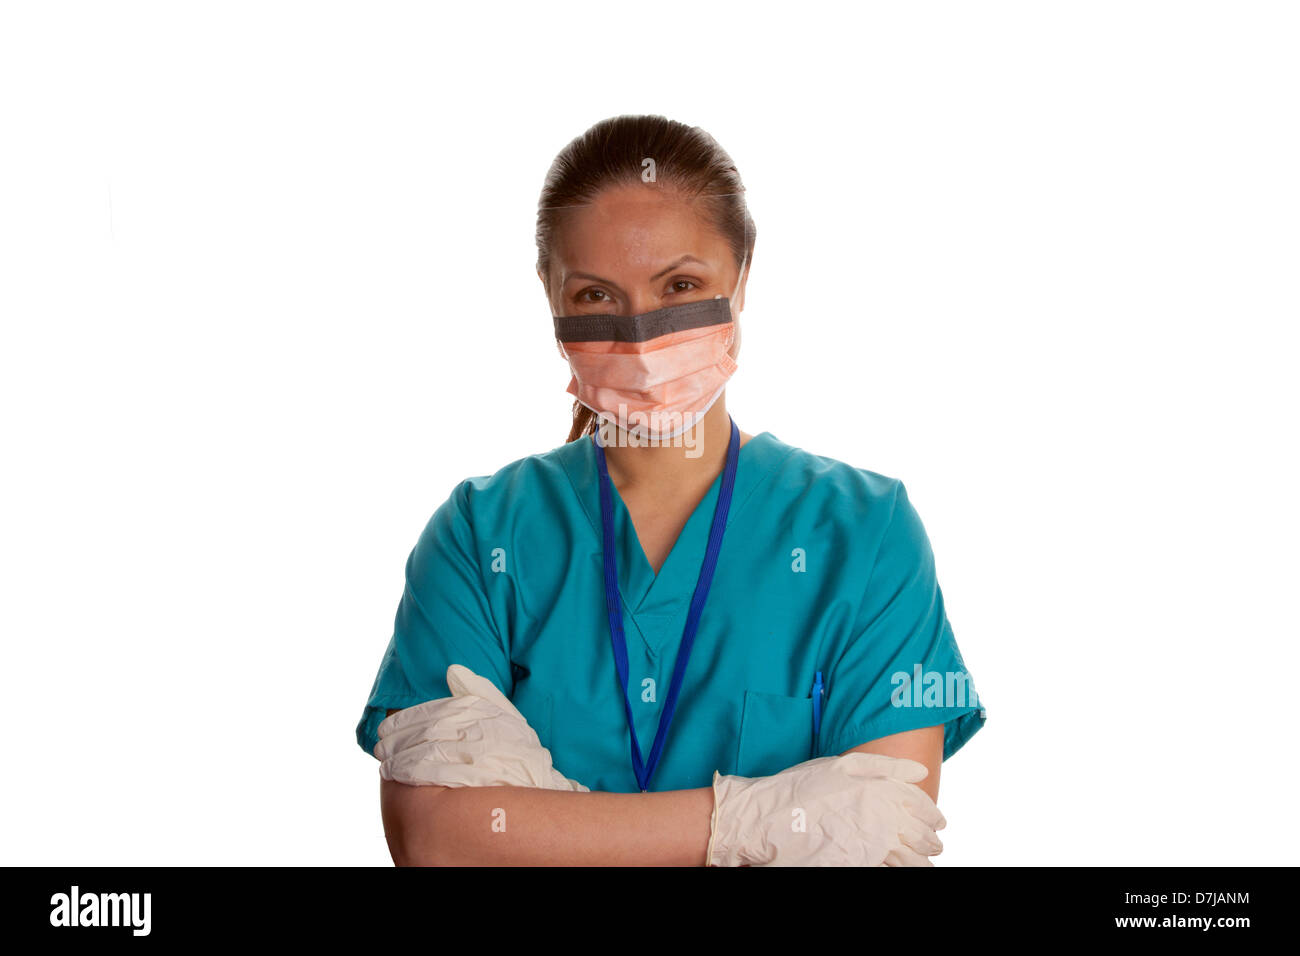 Portrait of a nurse wearing a protective face-mask with eye-shield. Smiling. Stock Photo